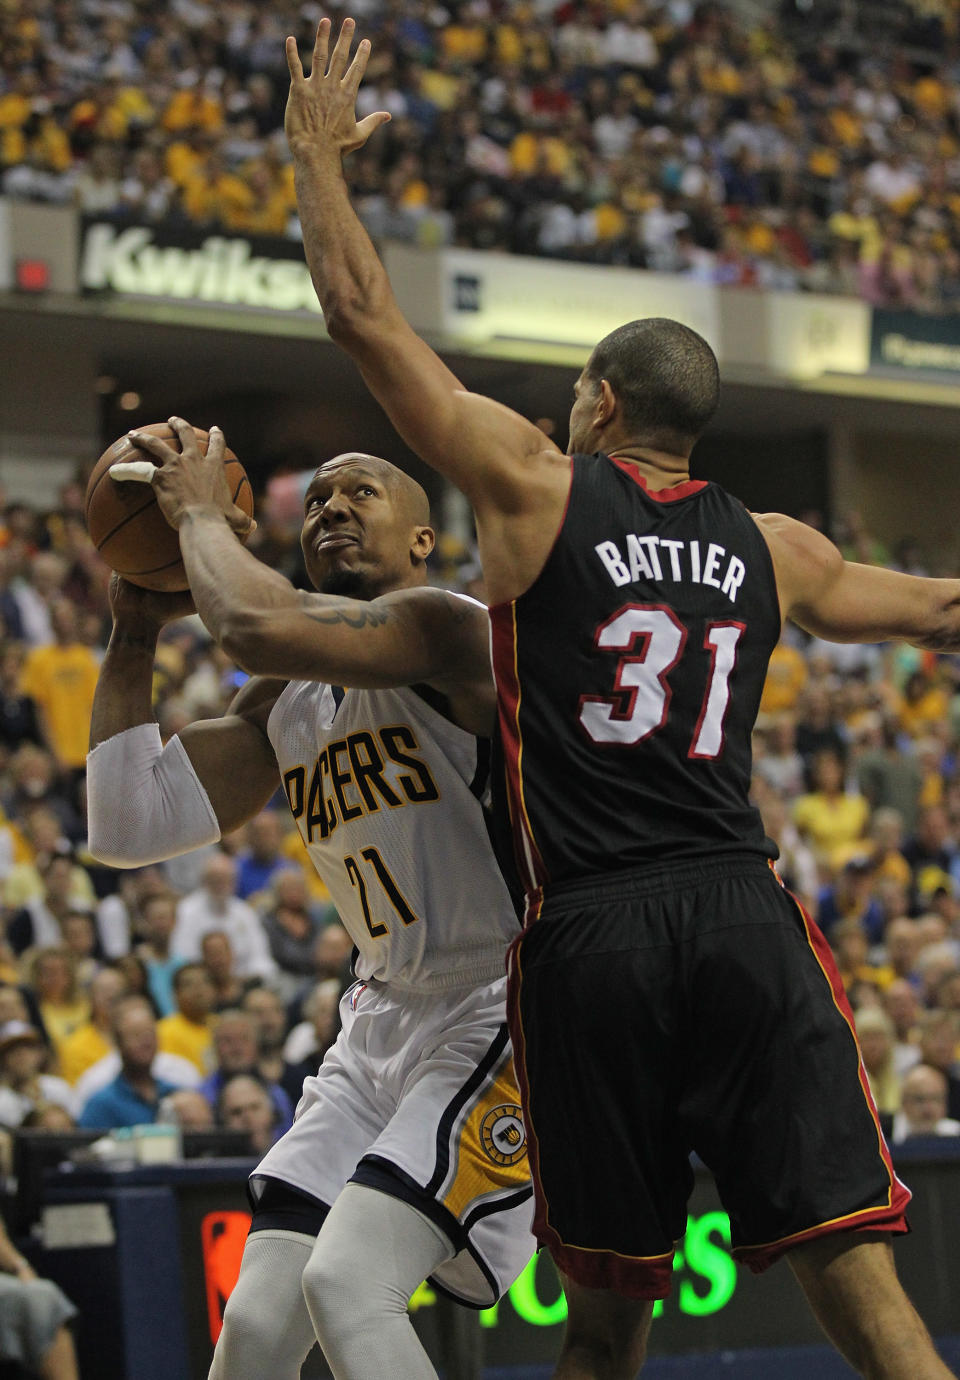 INDIANAPOLIS, IN - MAY 20: David West #21 of the Indiana Pacers tries to get off a shot against Shane Battier #31 of the Miami Heat in Game Four of the Eastern Conference Semifinals in the 2012 NBA Playoffs at Bankers Life Fieldhouse on May 20, 2012 in Indianapolis, Indiana. NOTE TO USER: User expressly acknowledges and agrees that, by downloading and/or using this photograph, User is consenting to the terms and conditions of the Getty Images License Agreement. (Photo by Jonathan Daniel/Getty Images)